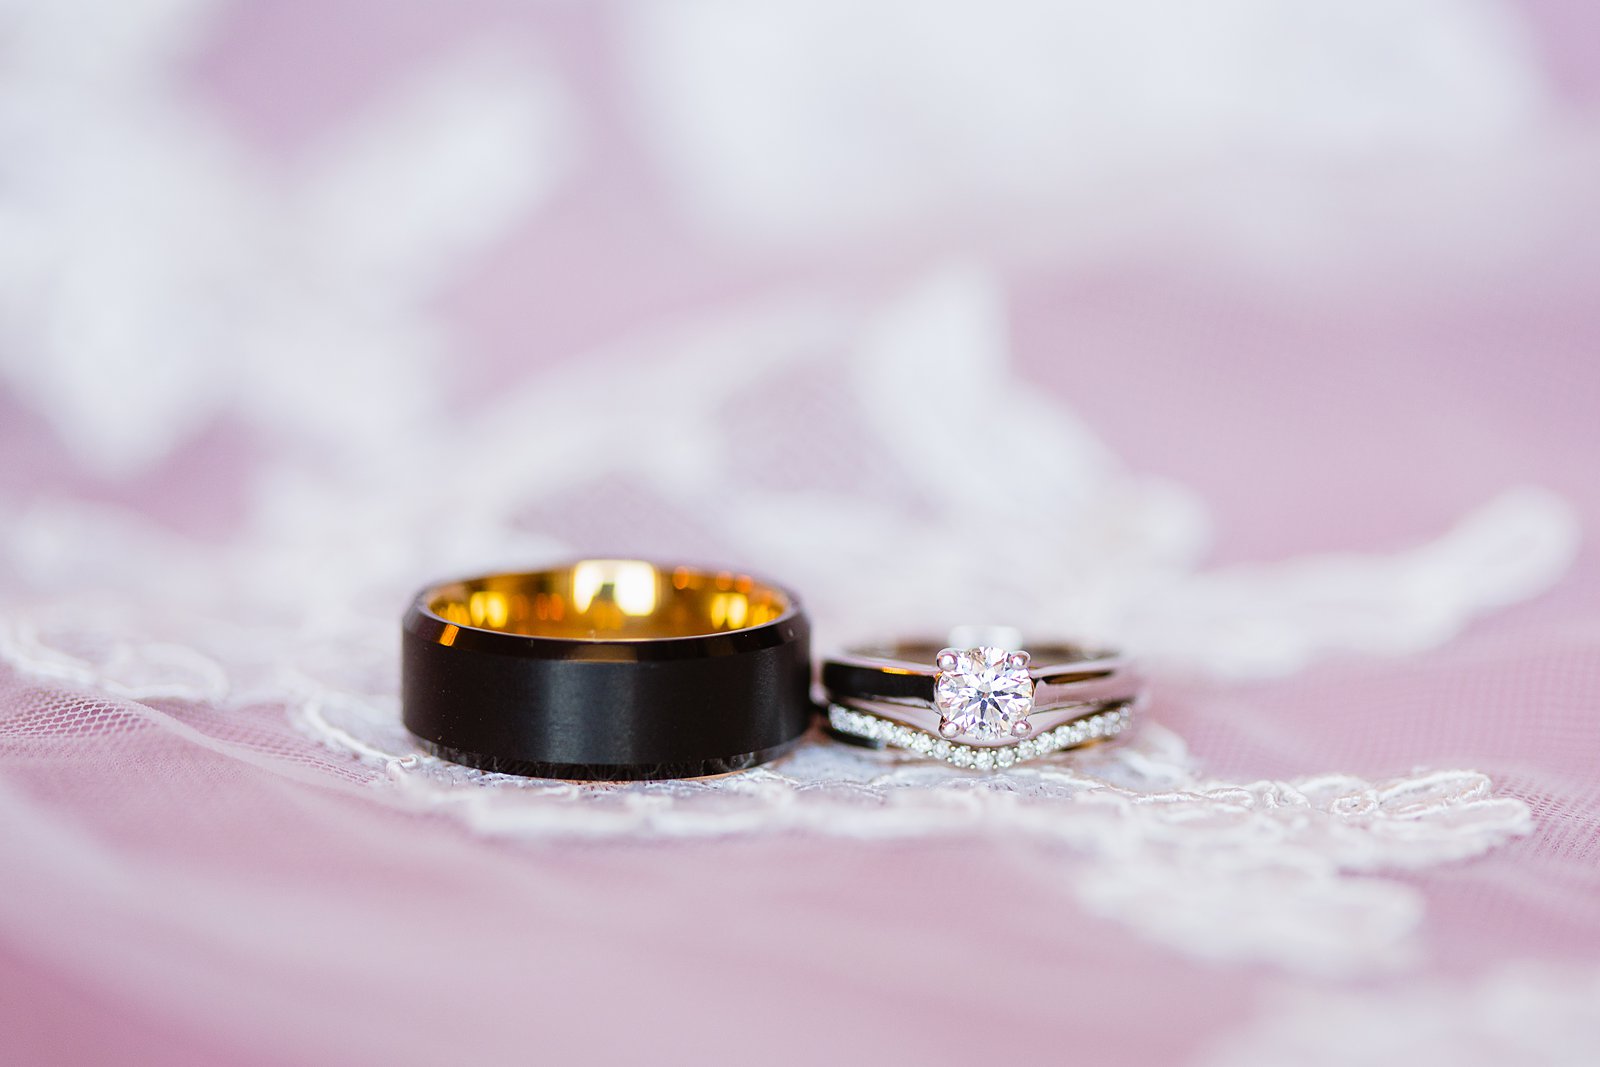 Bride and groom's wedding bands by PMA Photography.